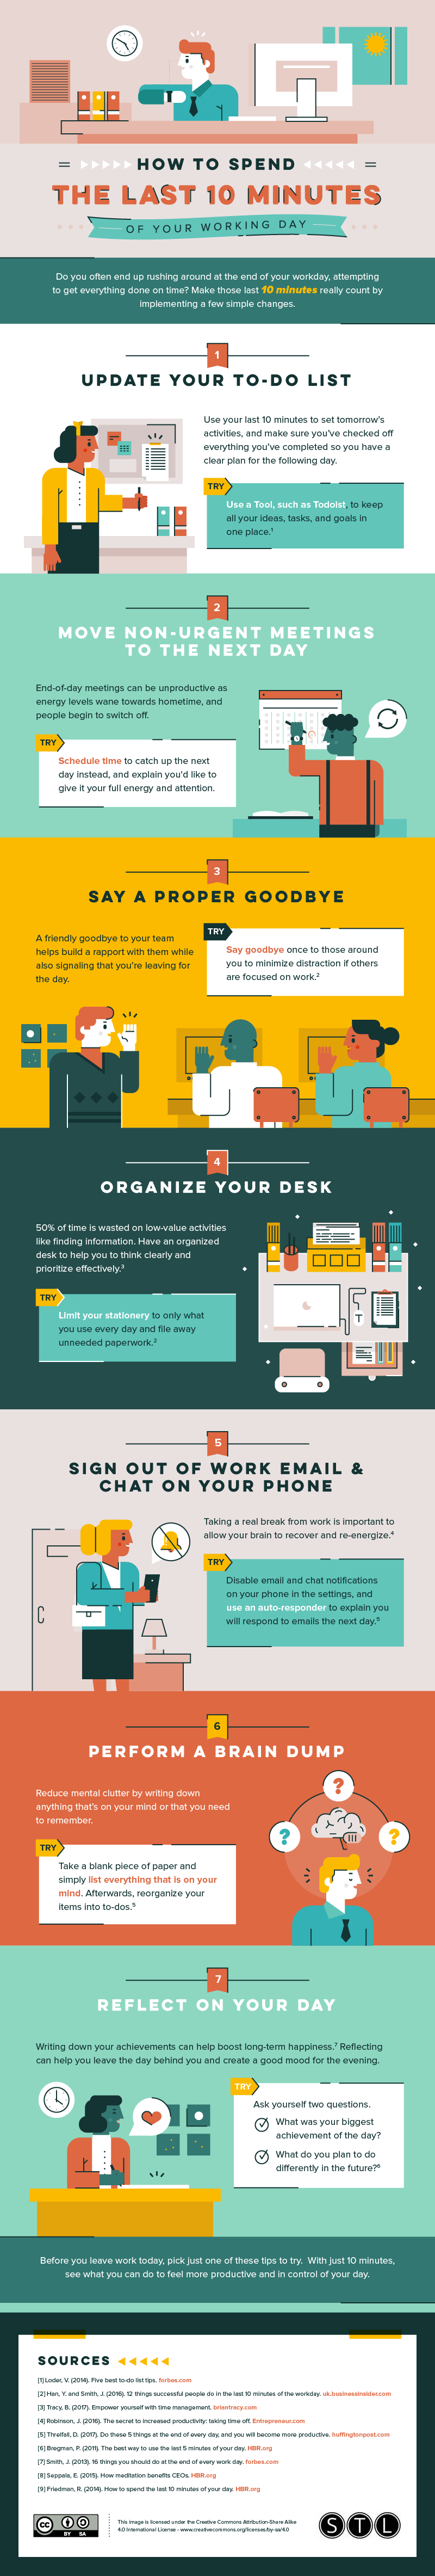 DESIGN - How to spend the last 10 minutes of your working day